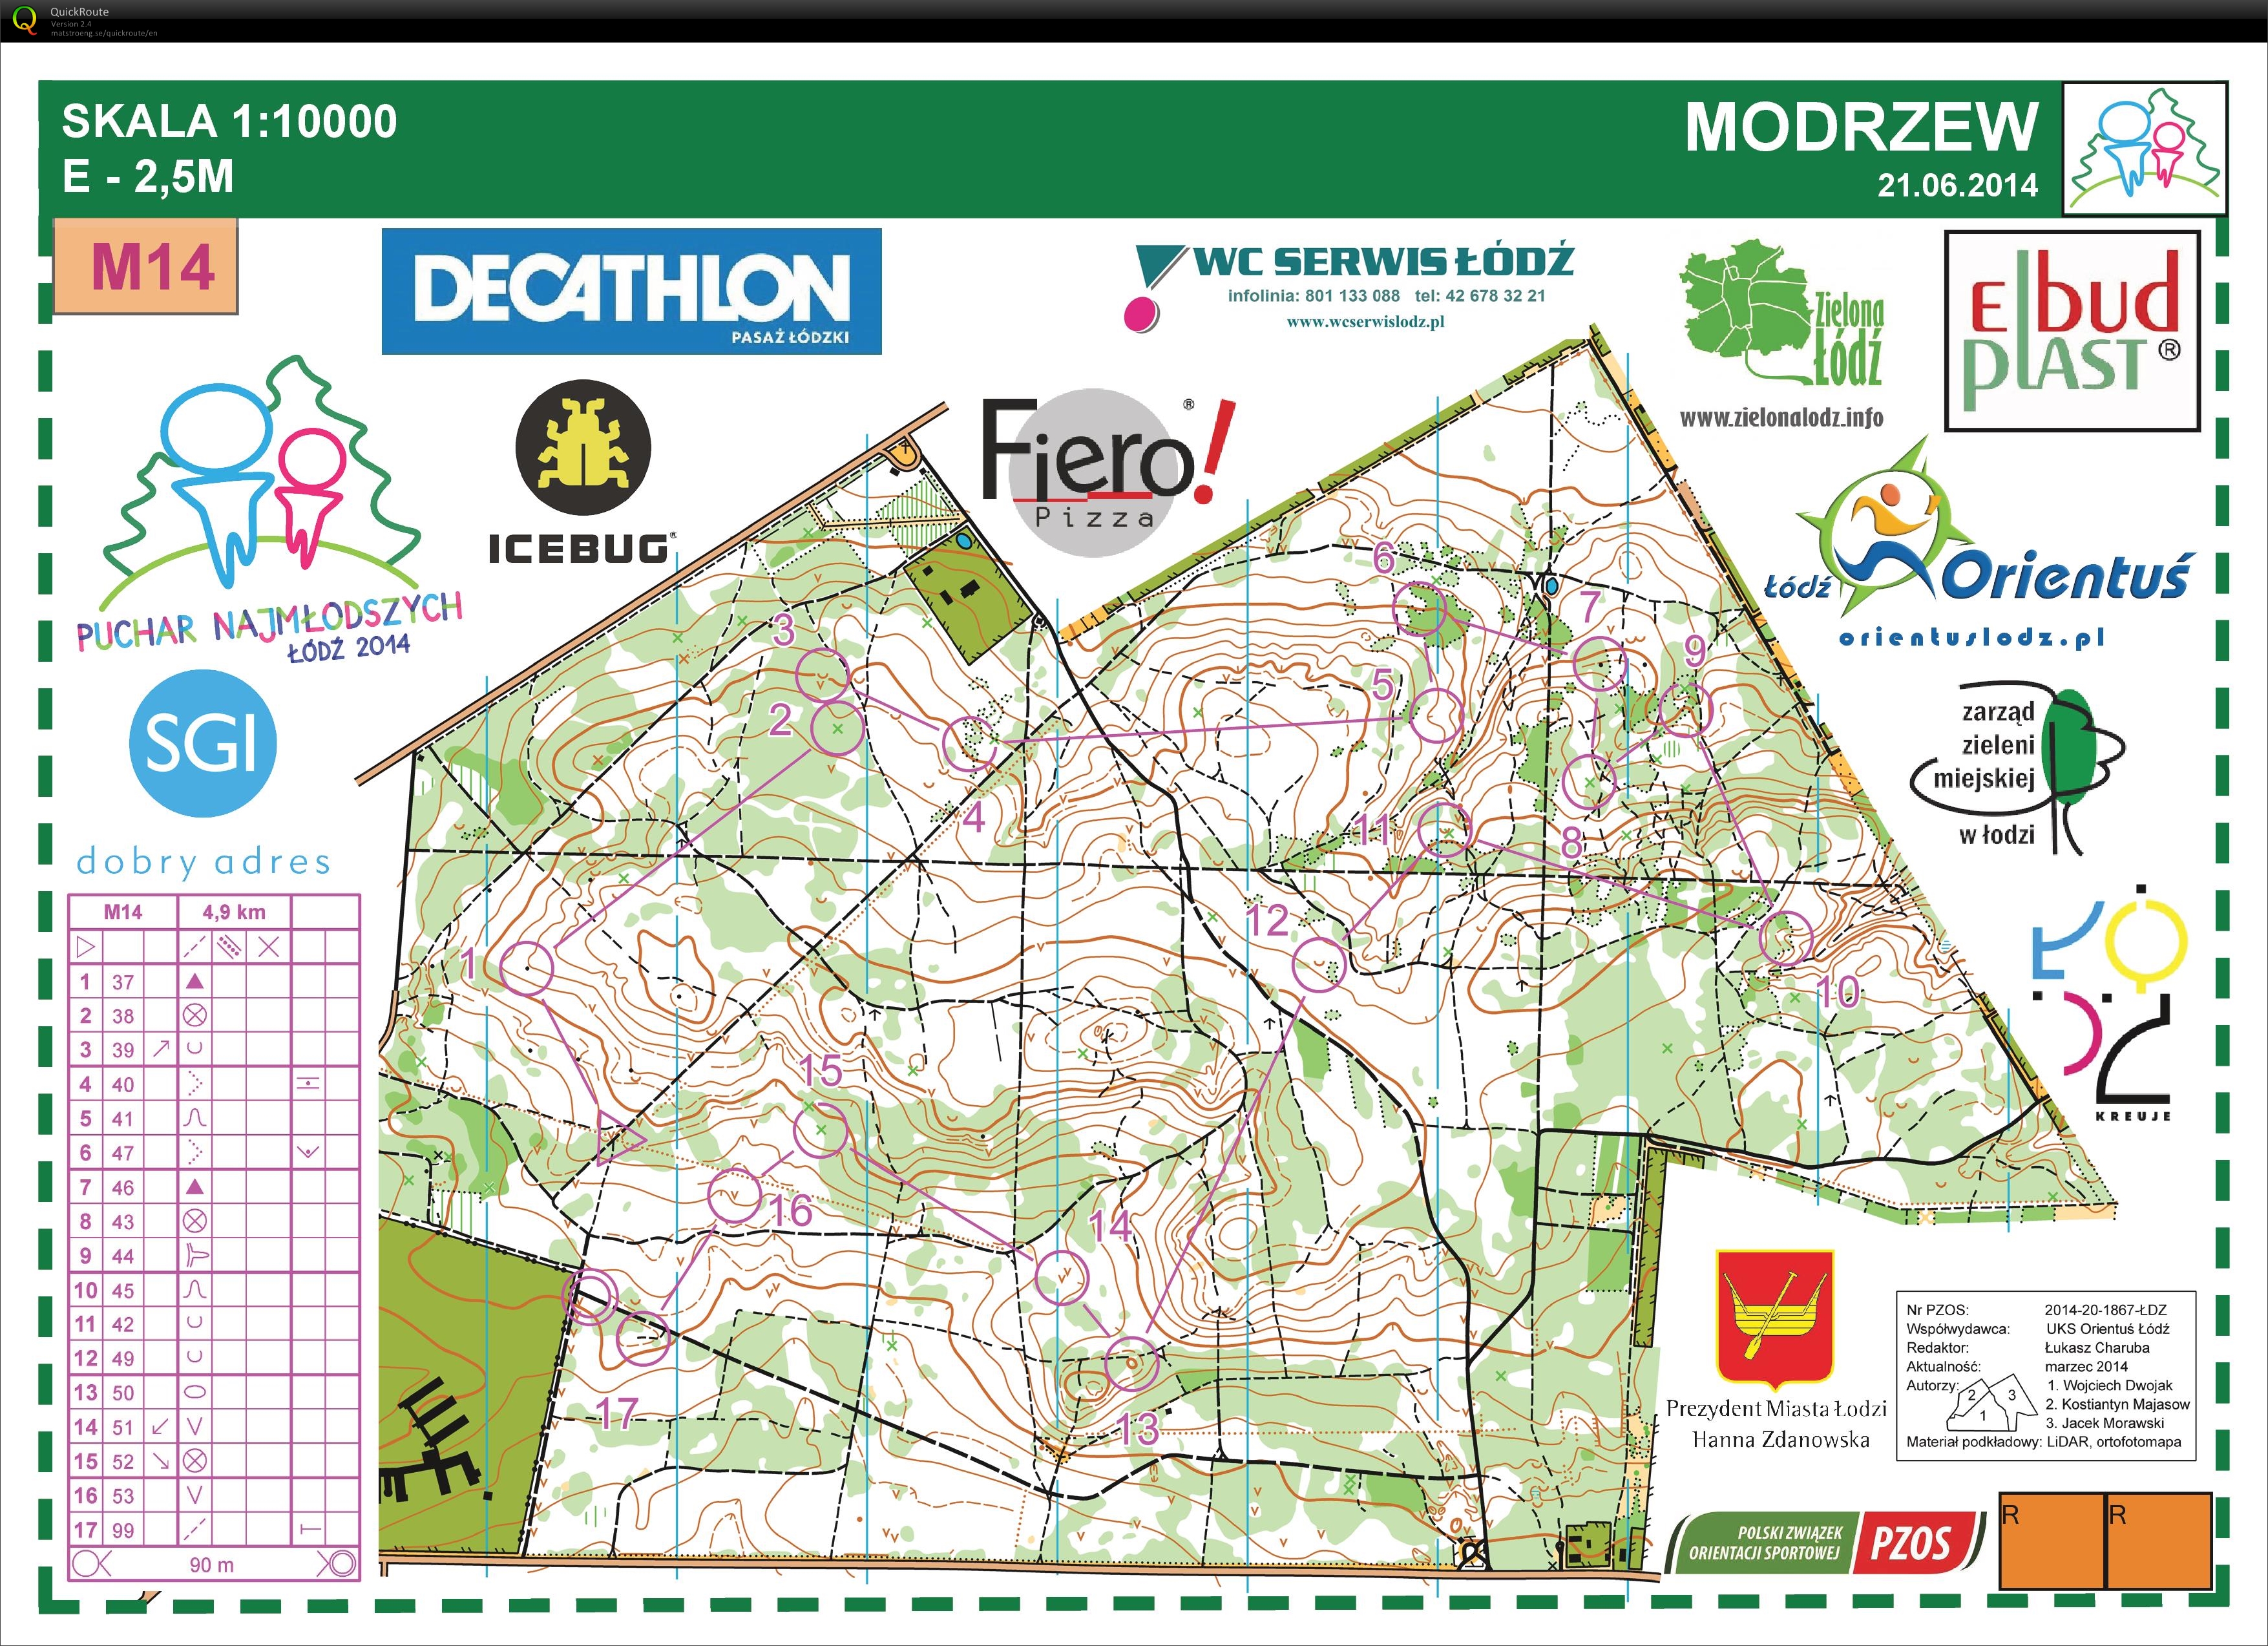 M14 course from the Youngsters' Cup (21.06.2014)